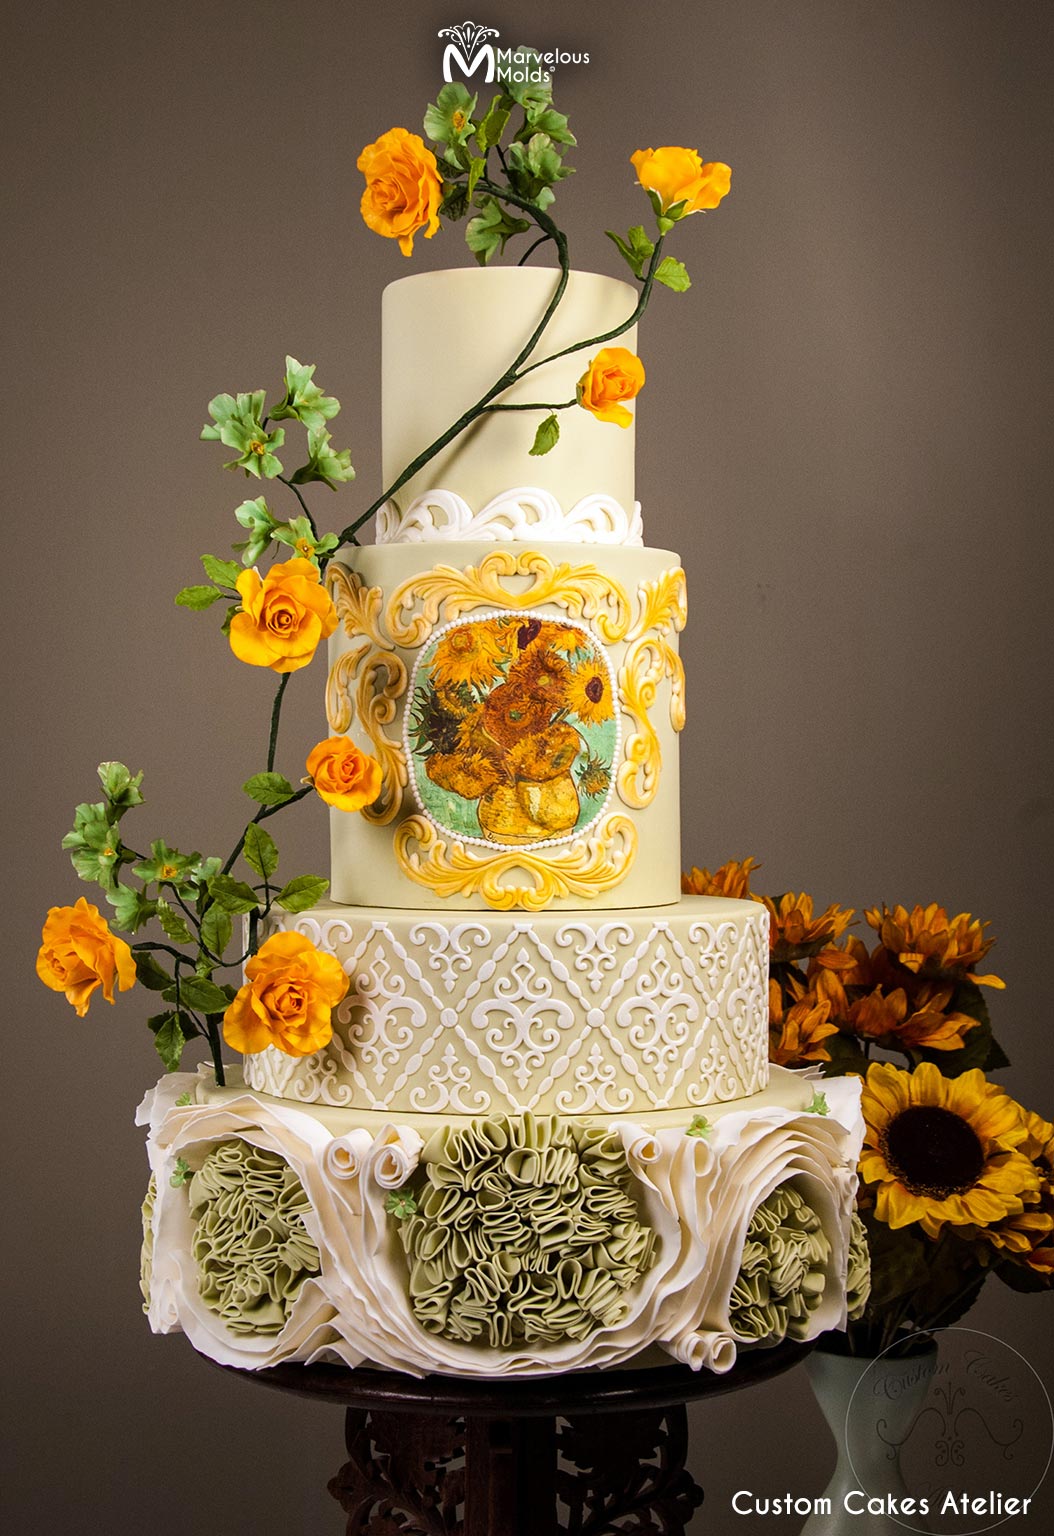 Vincent Vangough Sunflowers Themed Ruffled Wedding Cake Decorated using the Flourish Border Silicone Mold by Marvelous Molds